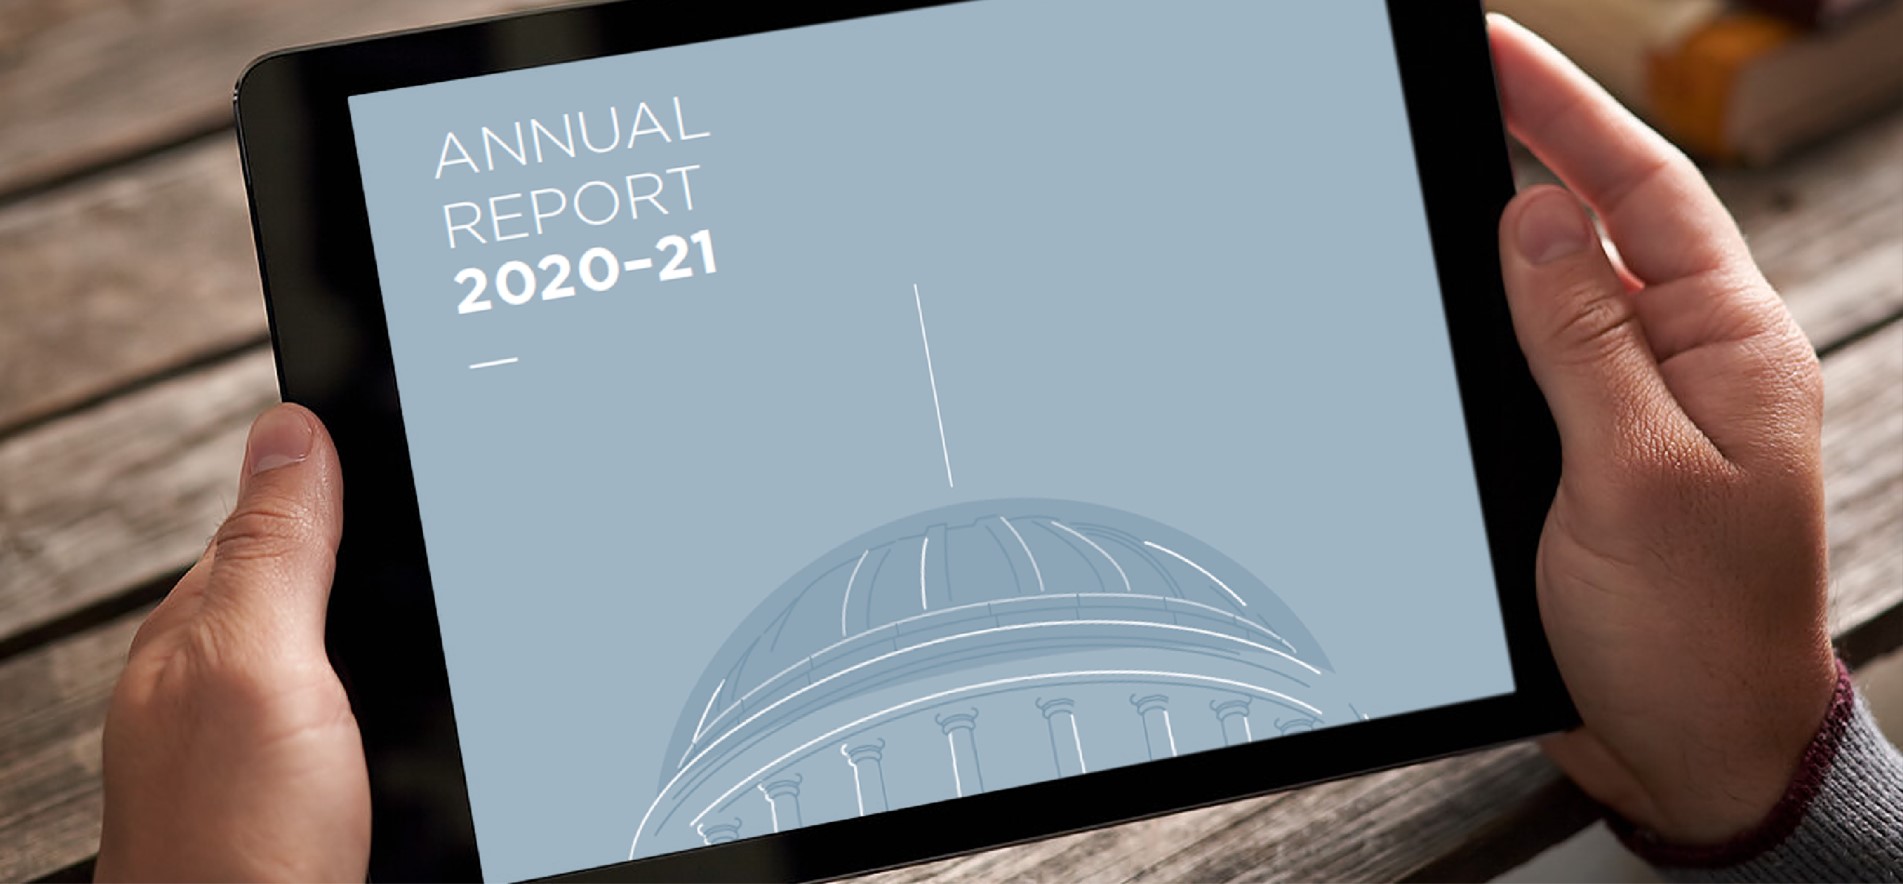 Hands holding tablet displaying annual report cover